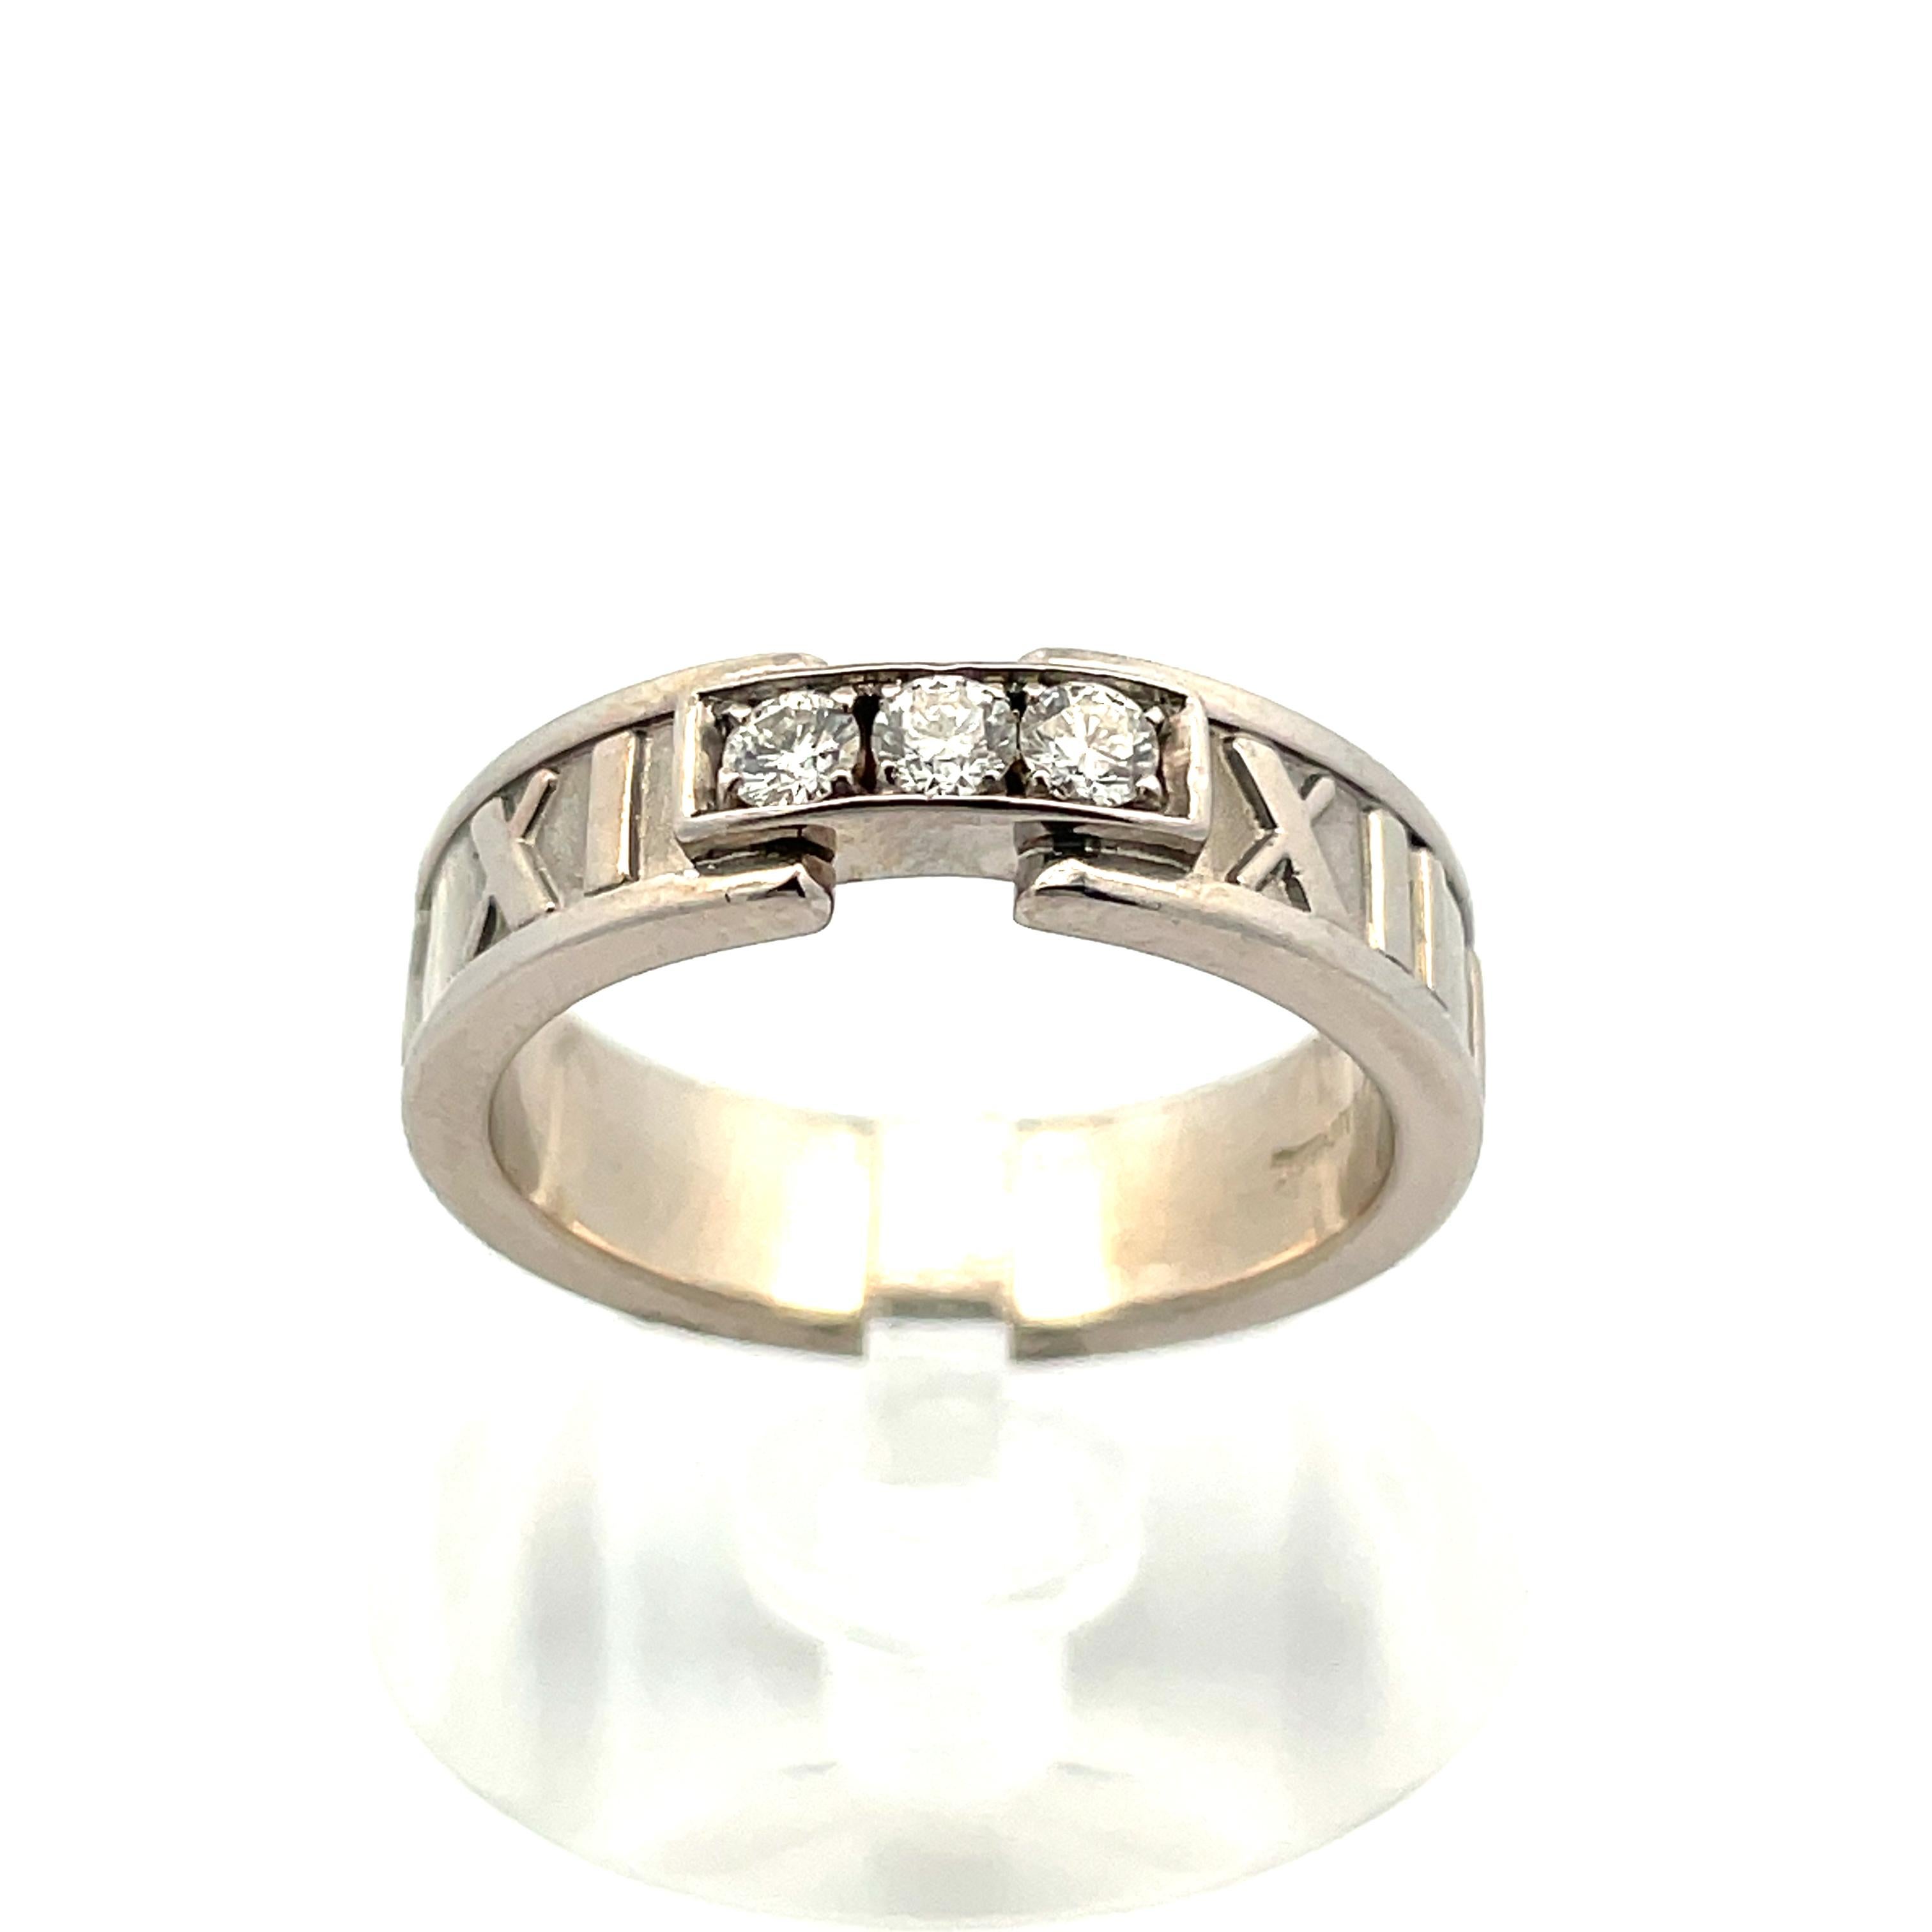 1995 Tiffany & Co 18K White Gold and Diamond Atlas Band In Excellent Condition For Sale In Lexington, KY